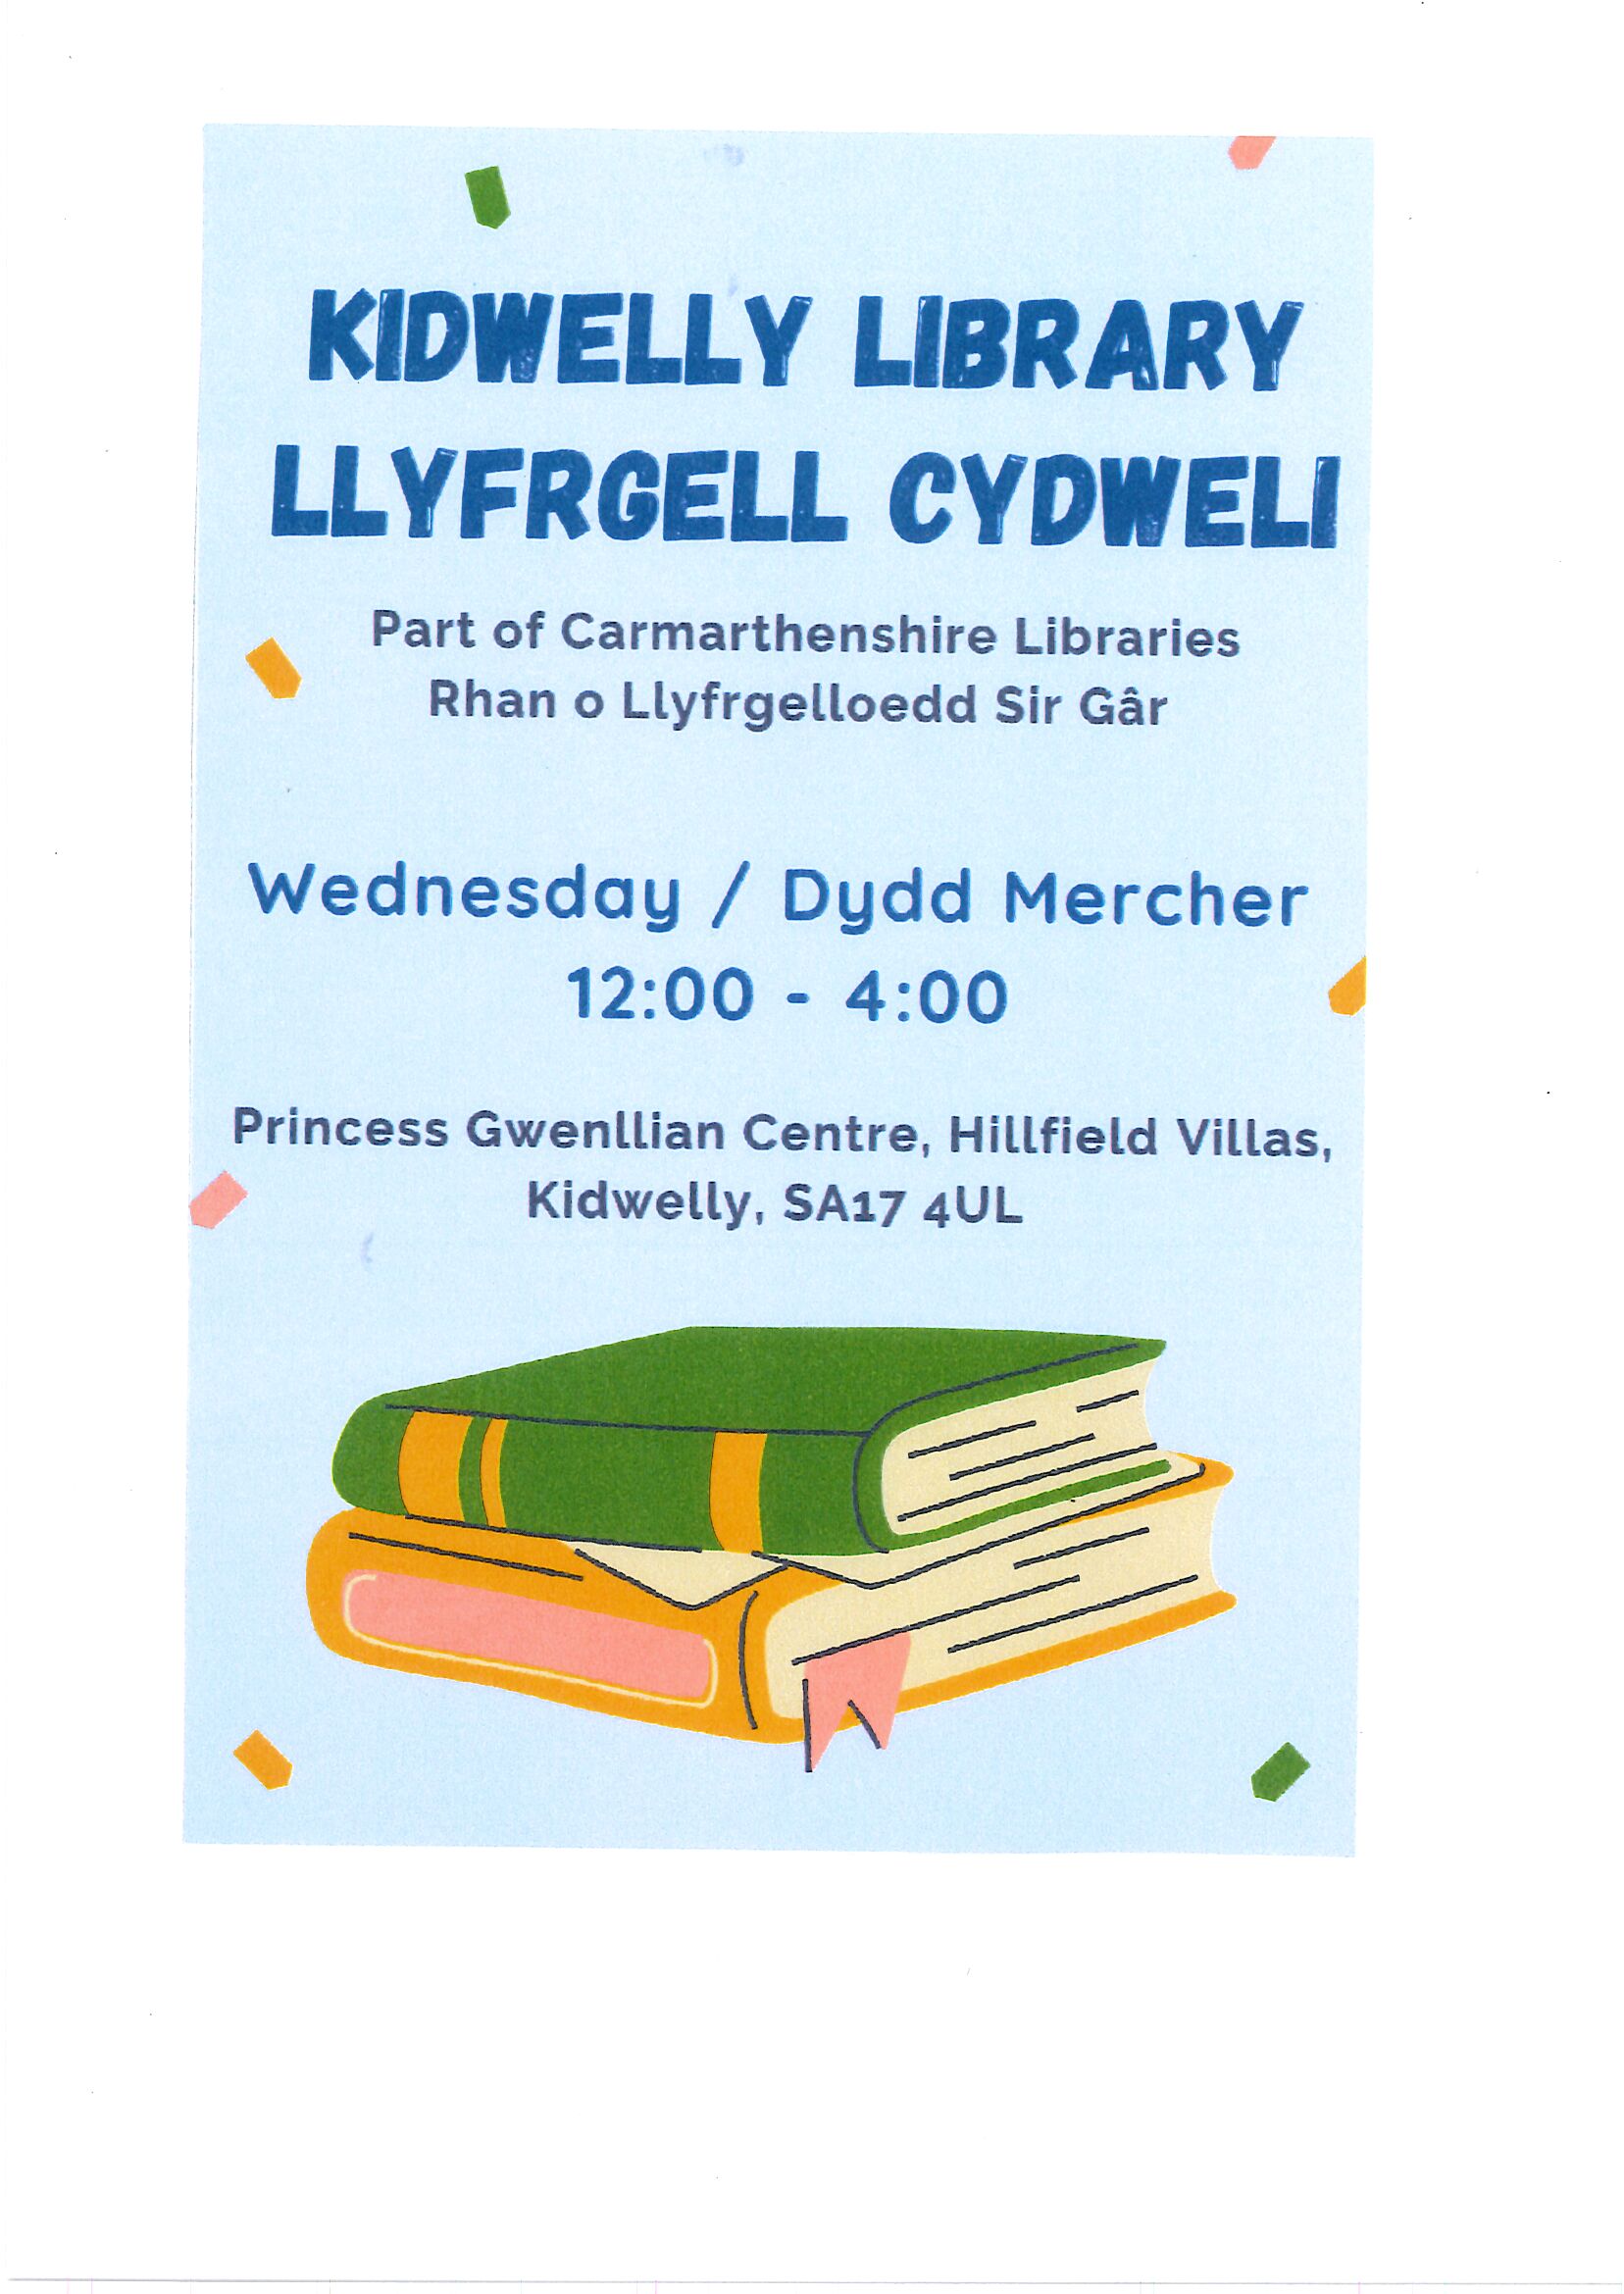 Kidwelly Library open every Wednesday at the Princess Gwenllian Centre between 12 & 4